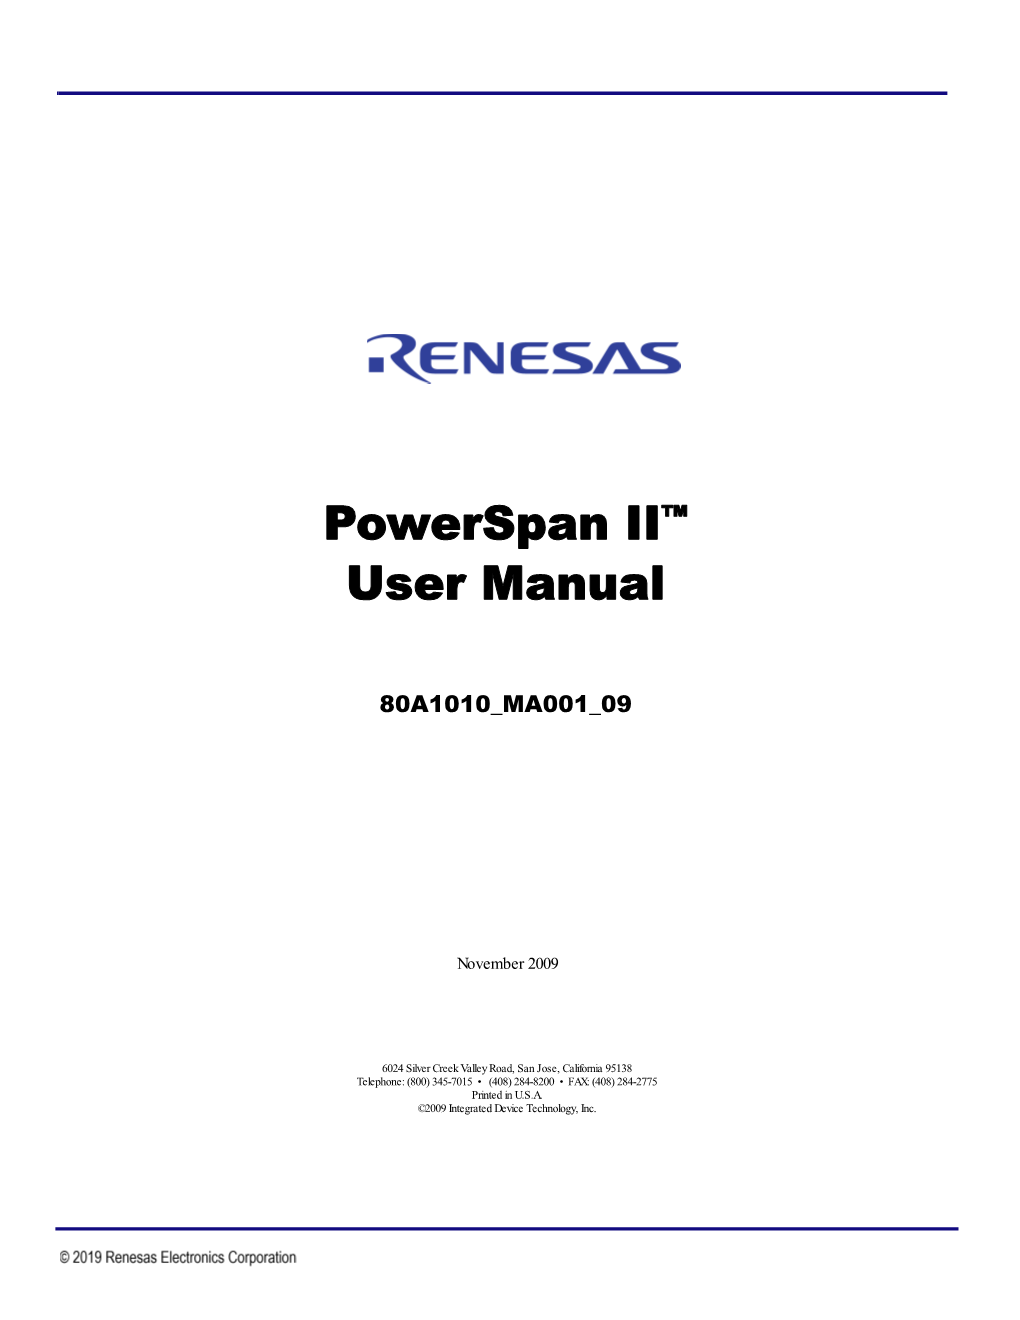 Powerspan II User Manual 80A1010 MA001 09 4 Contents